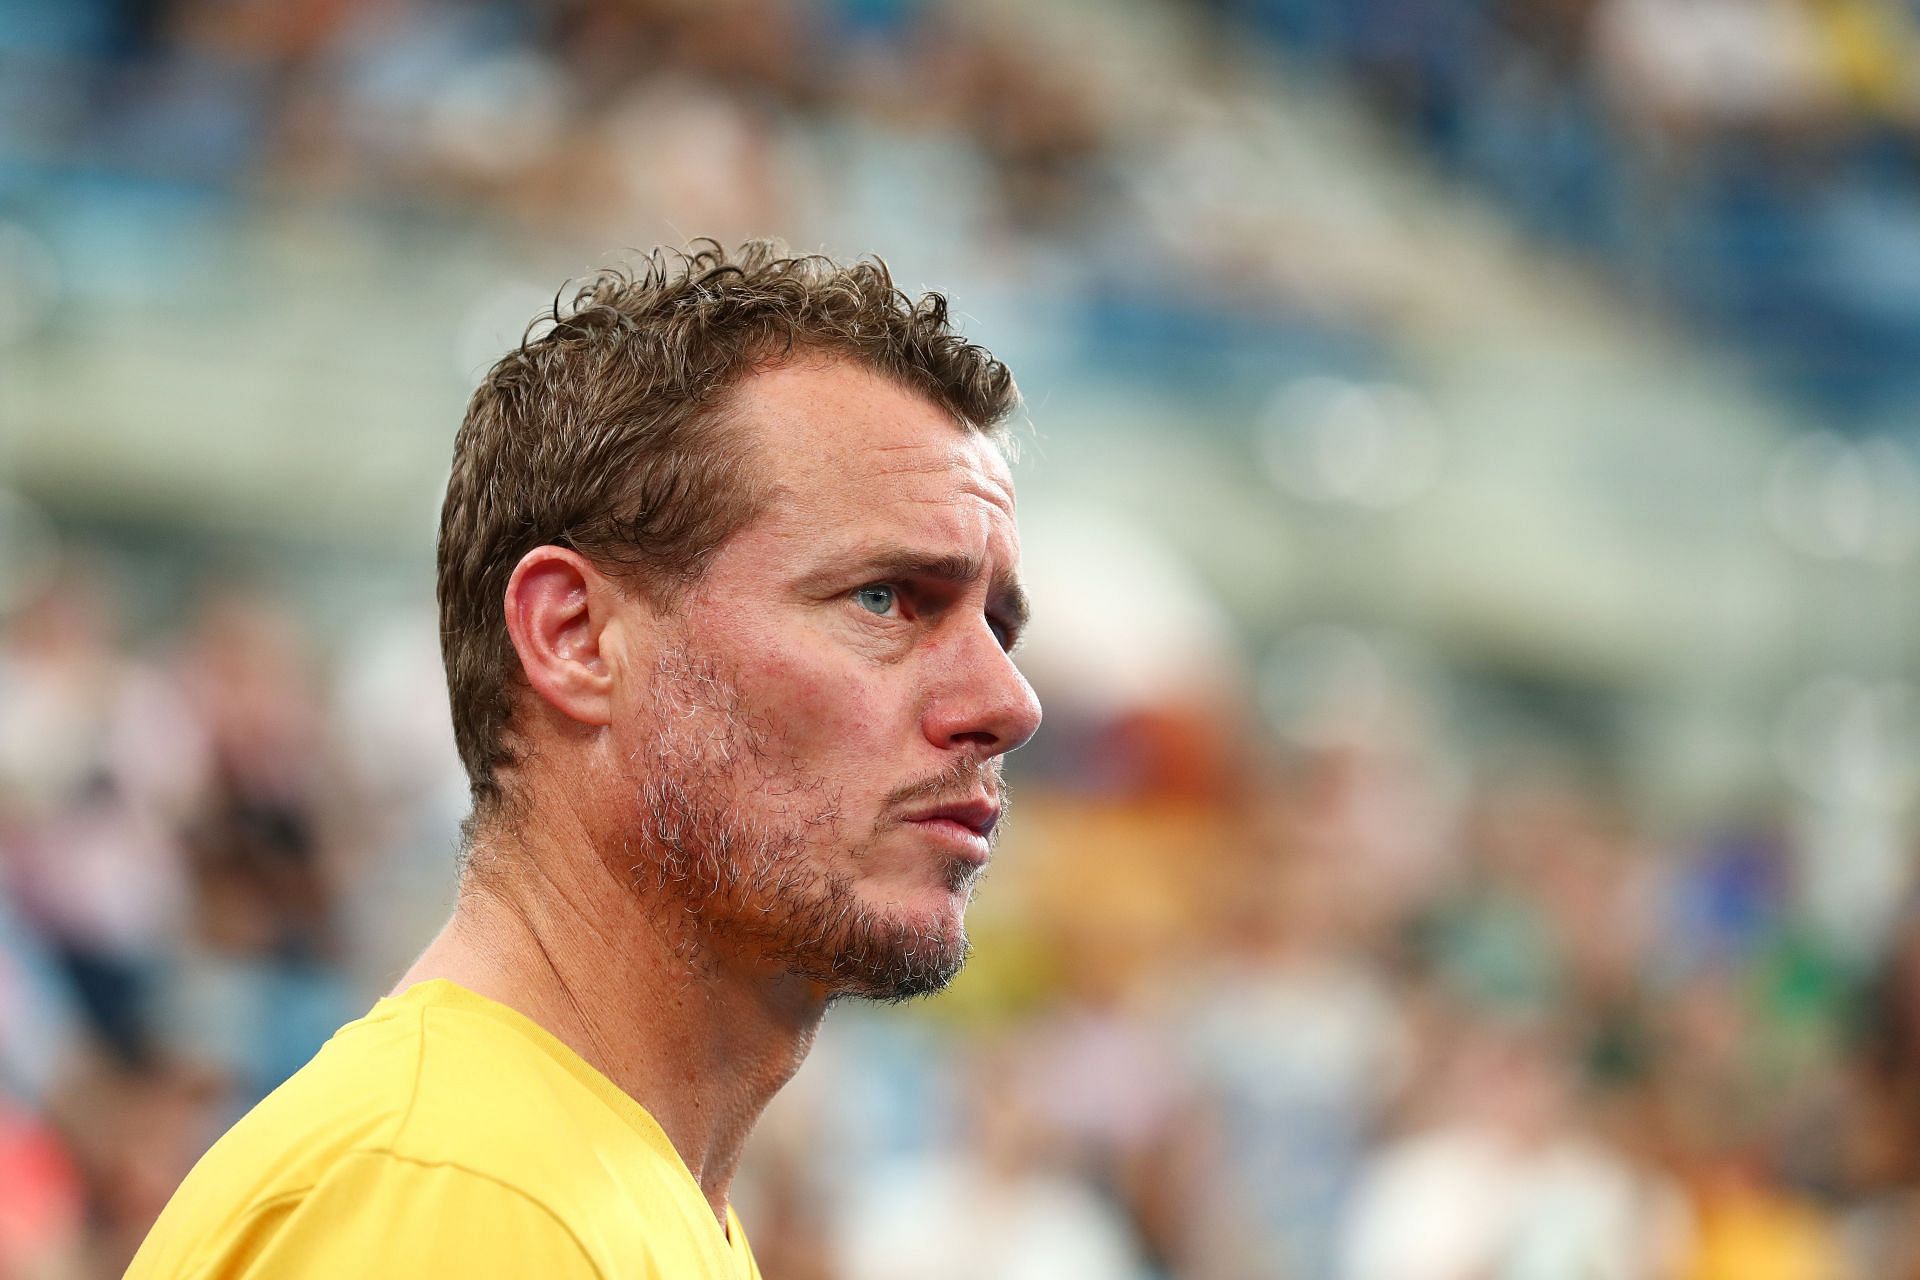 Lleyton Hewitt pictured before the Davis Cup qualifier between Australia and Hungary